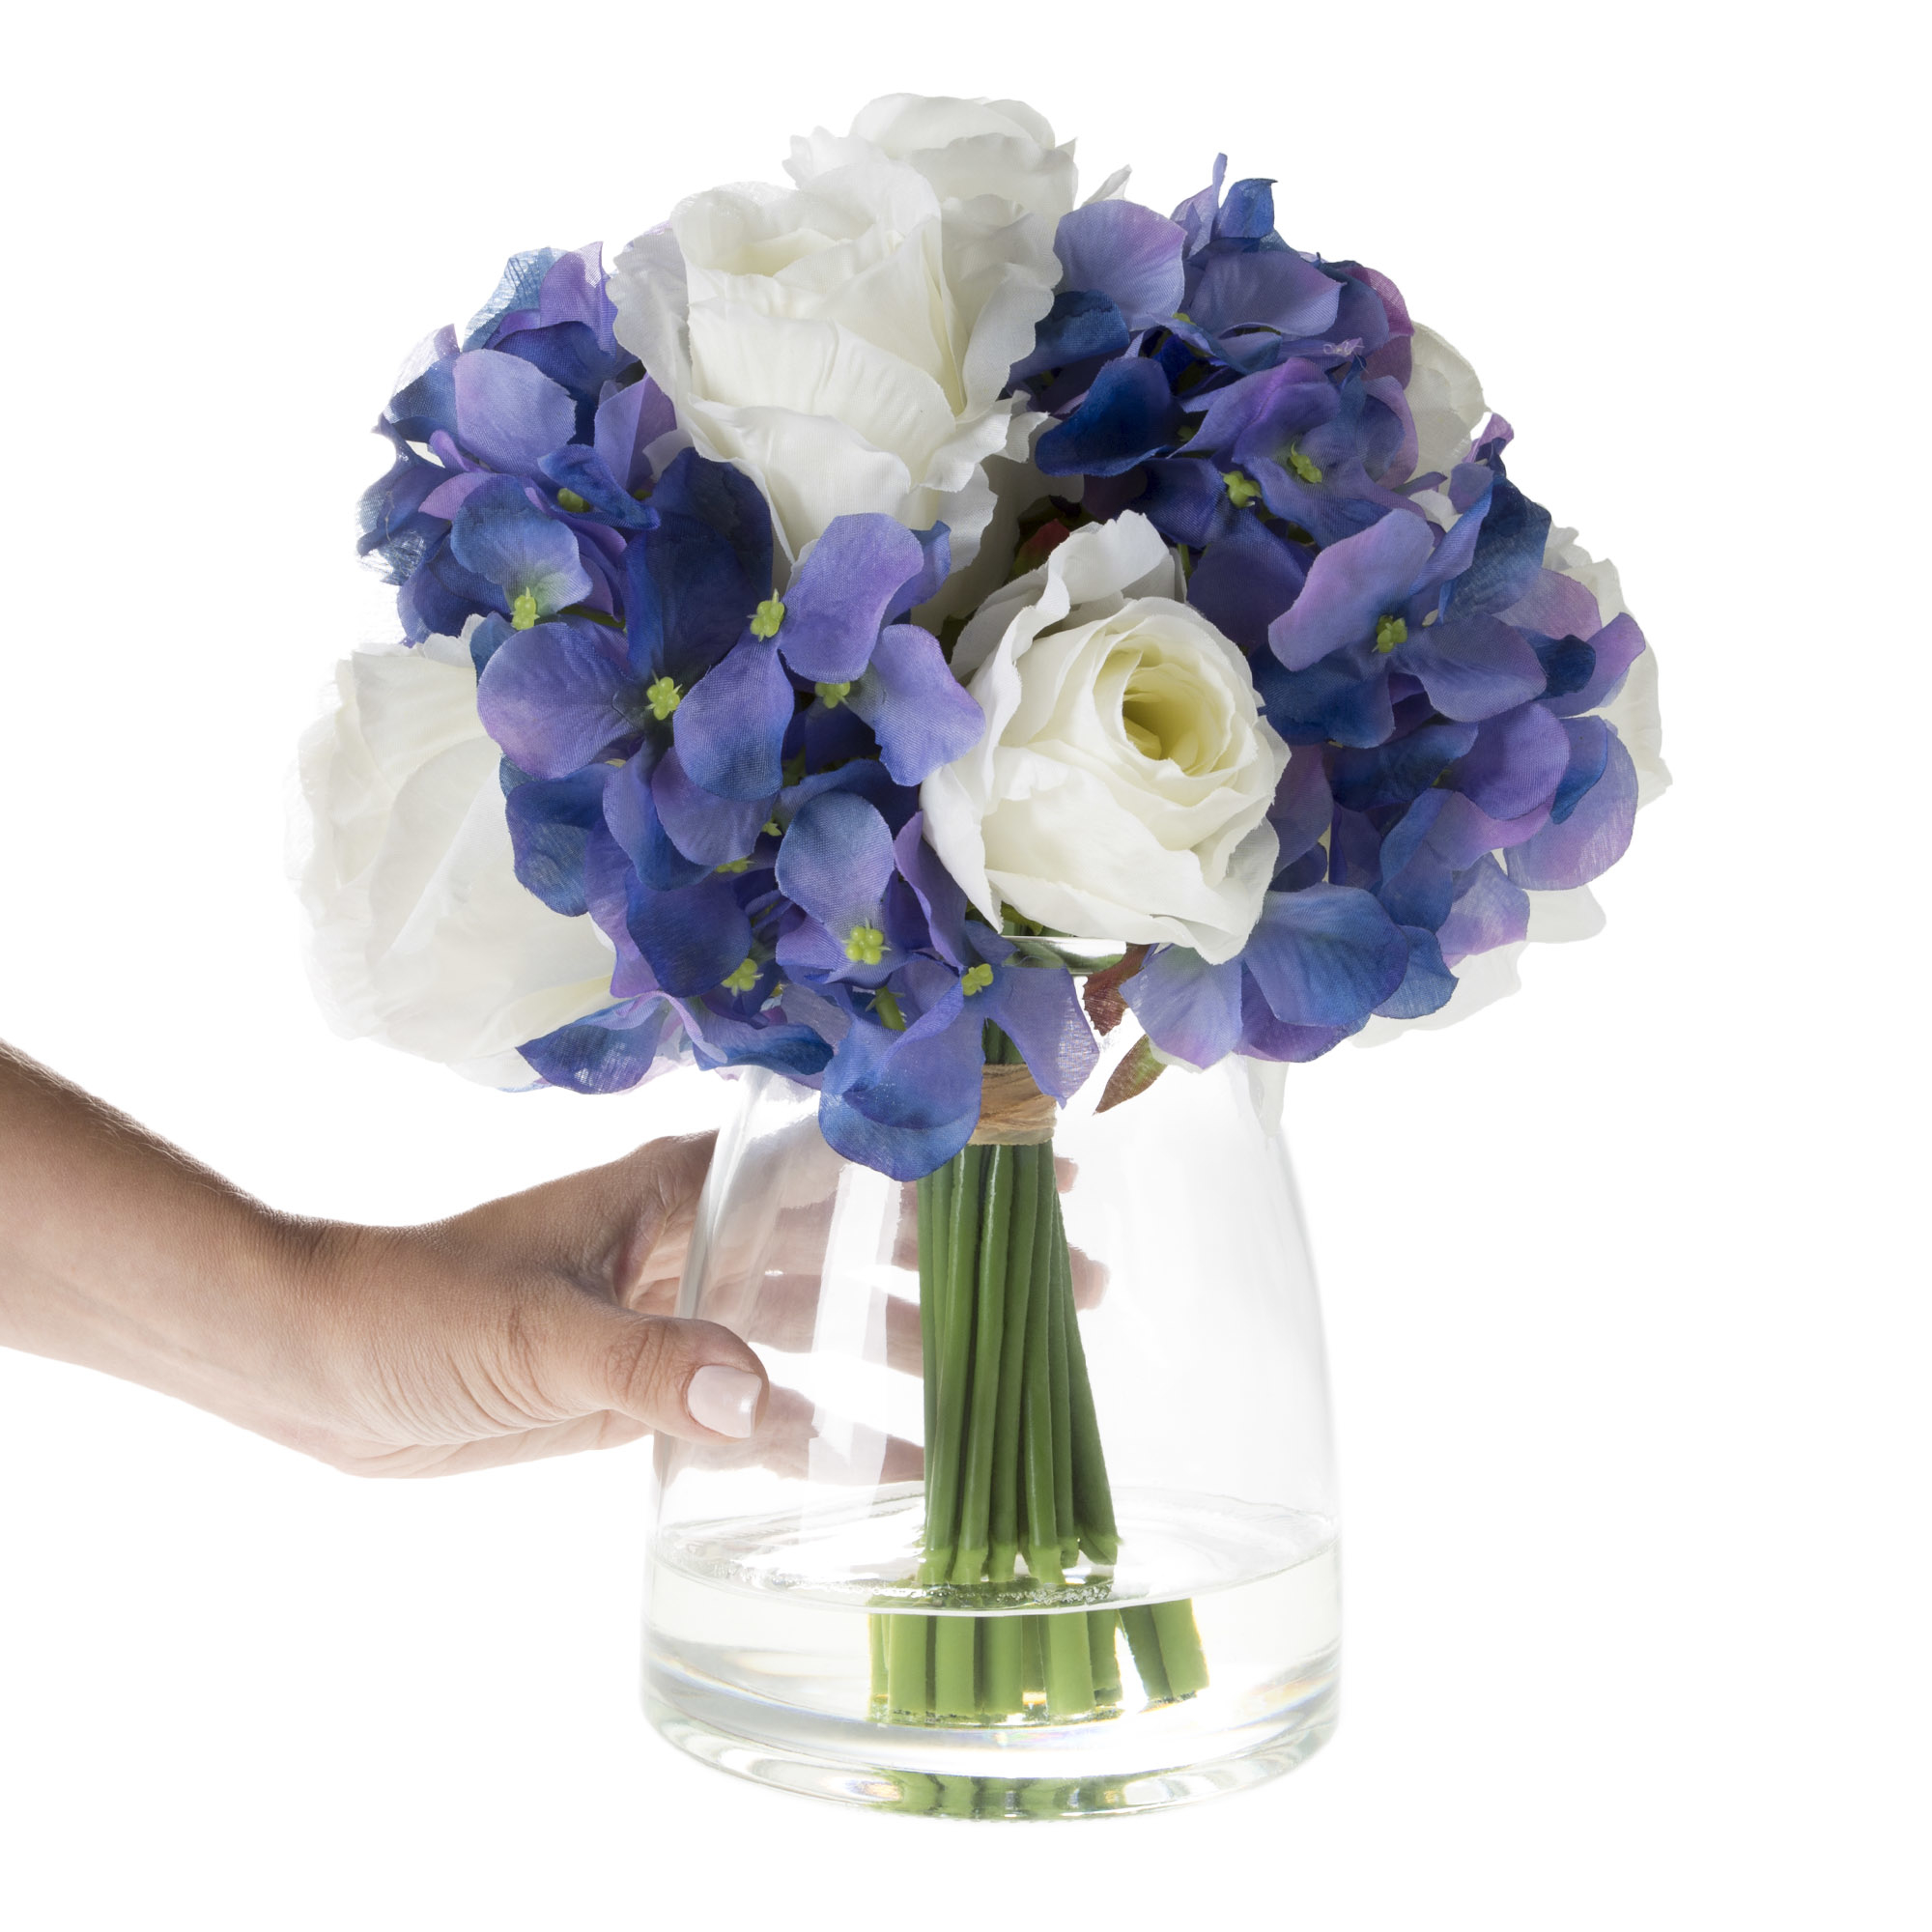 Hydrangea and Rose Artificial Silk Floral Arrangement in Glass Vase with Faux Water for Home Decor, Wedding Centerpiece